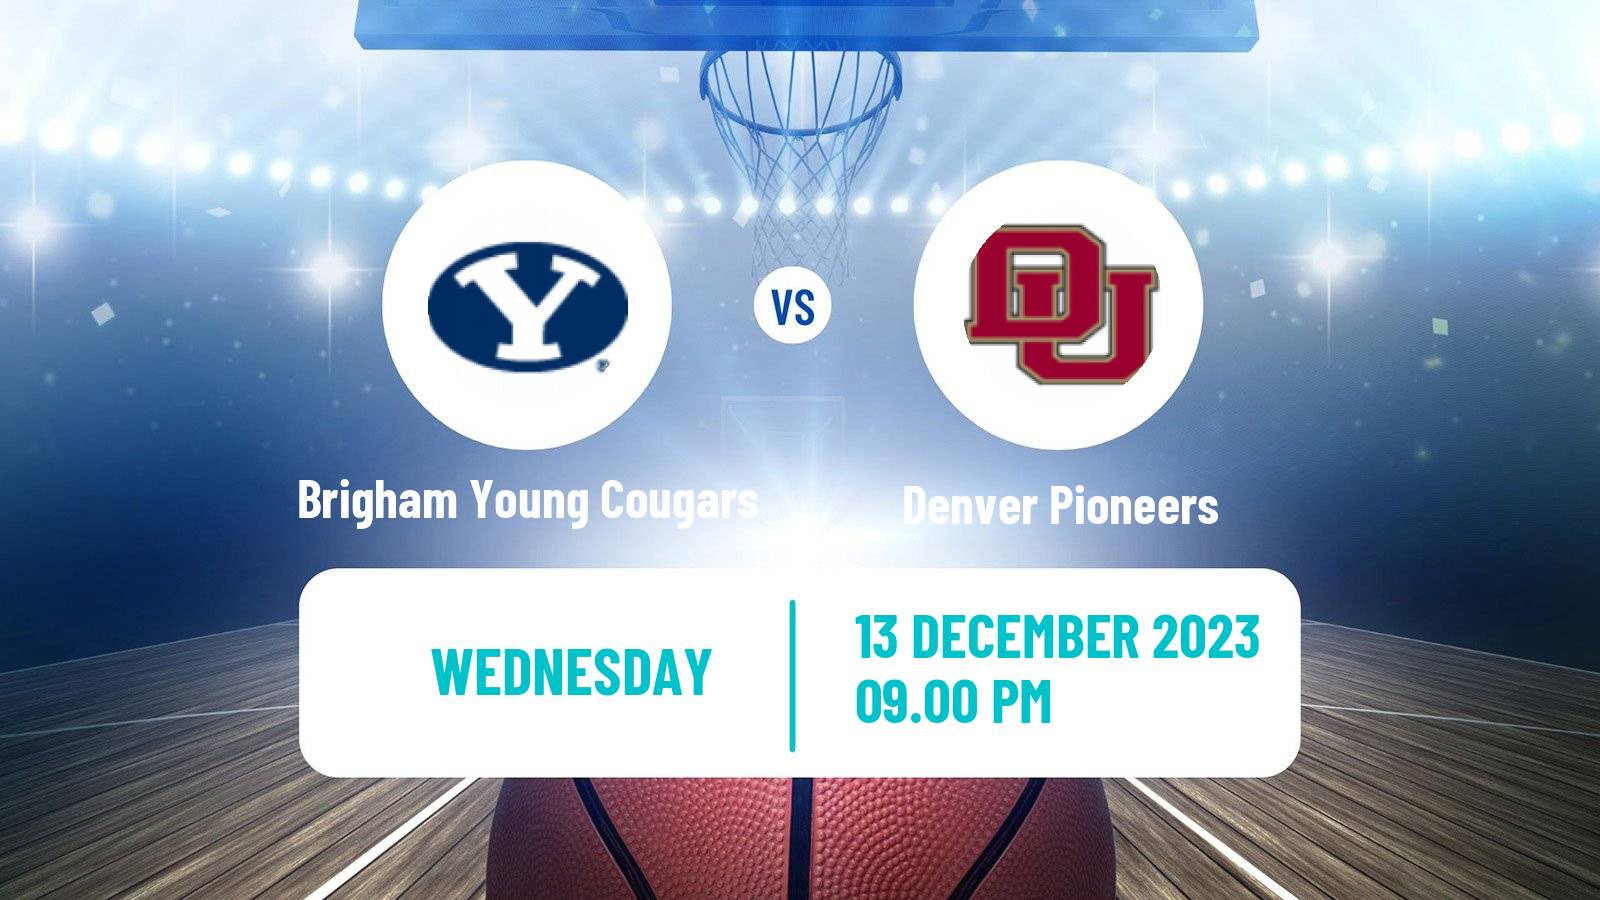 Basketball NCAA College Basketball Brigham Young Cougars - Denver Pioneers